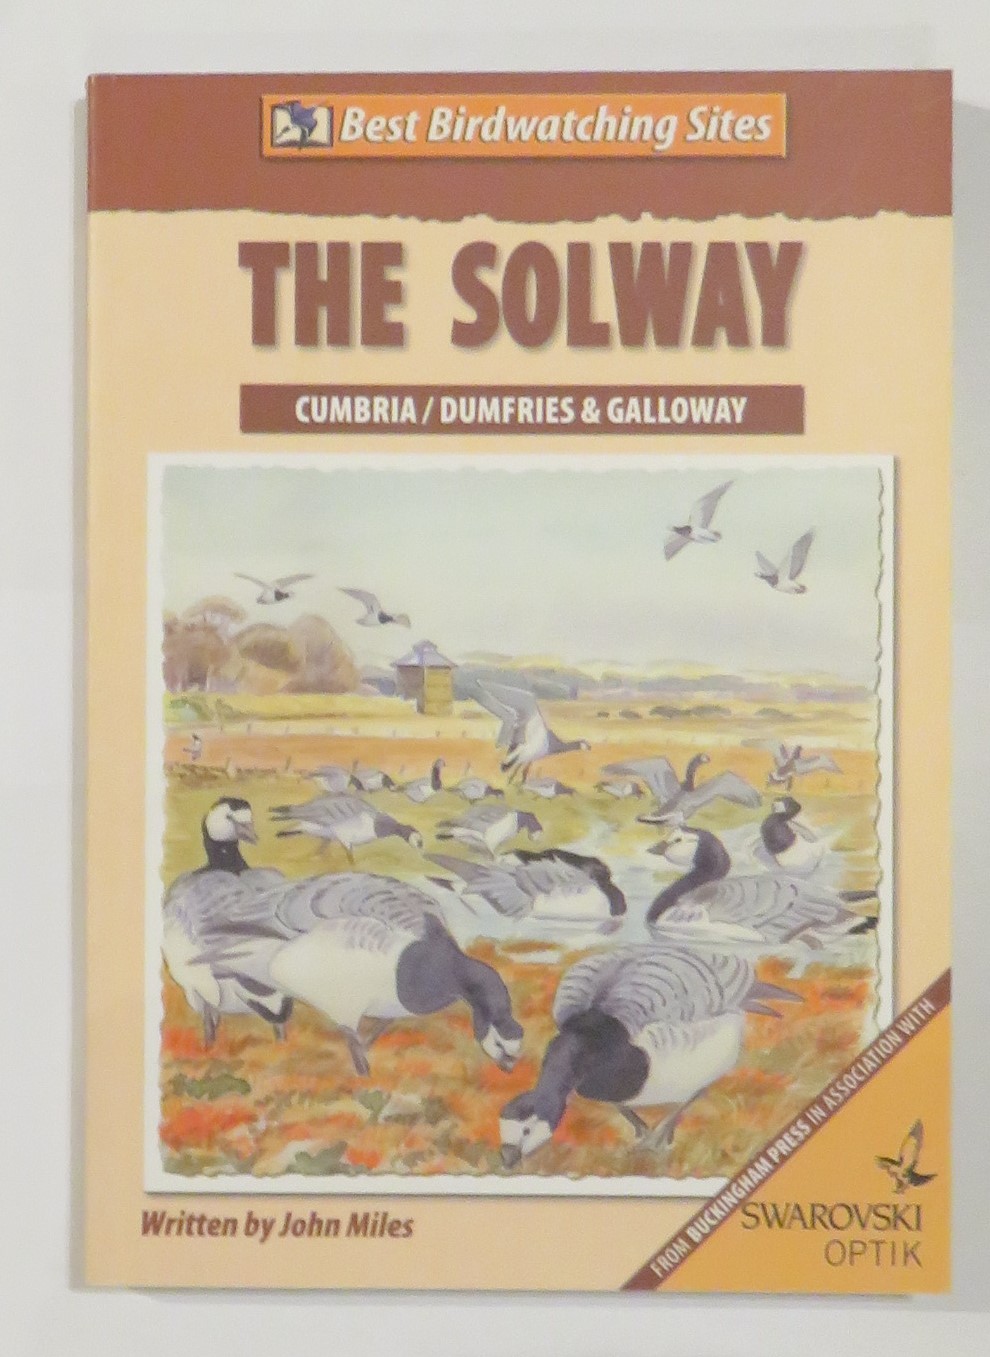 The Solway: Cumbria/Dumfries & Galloway